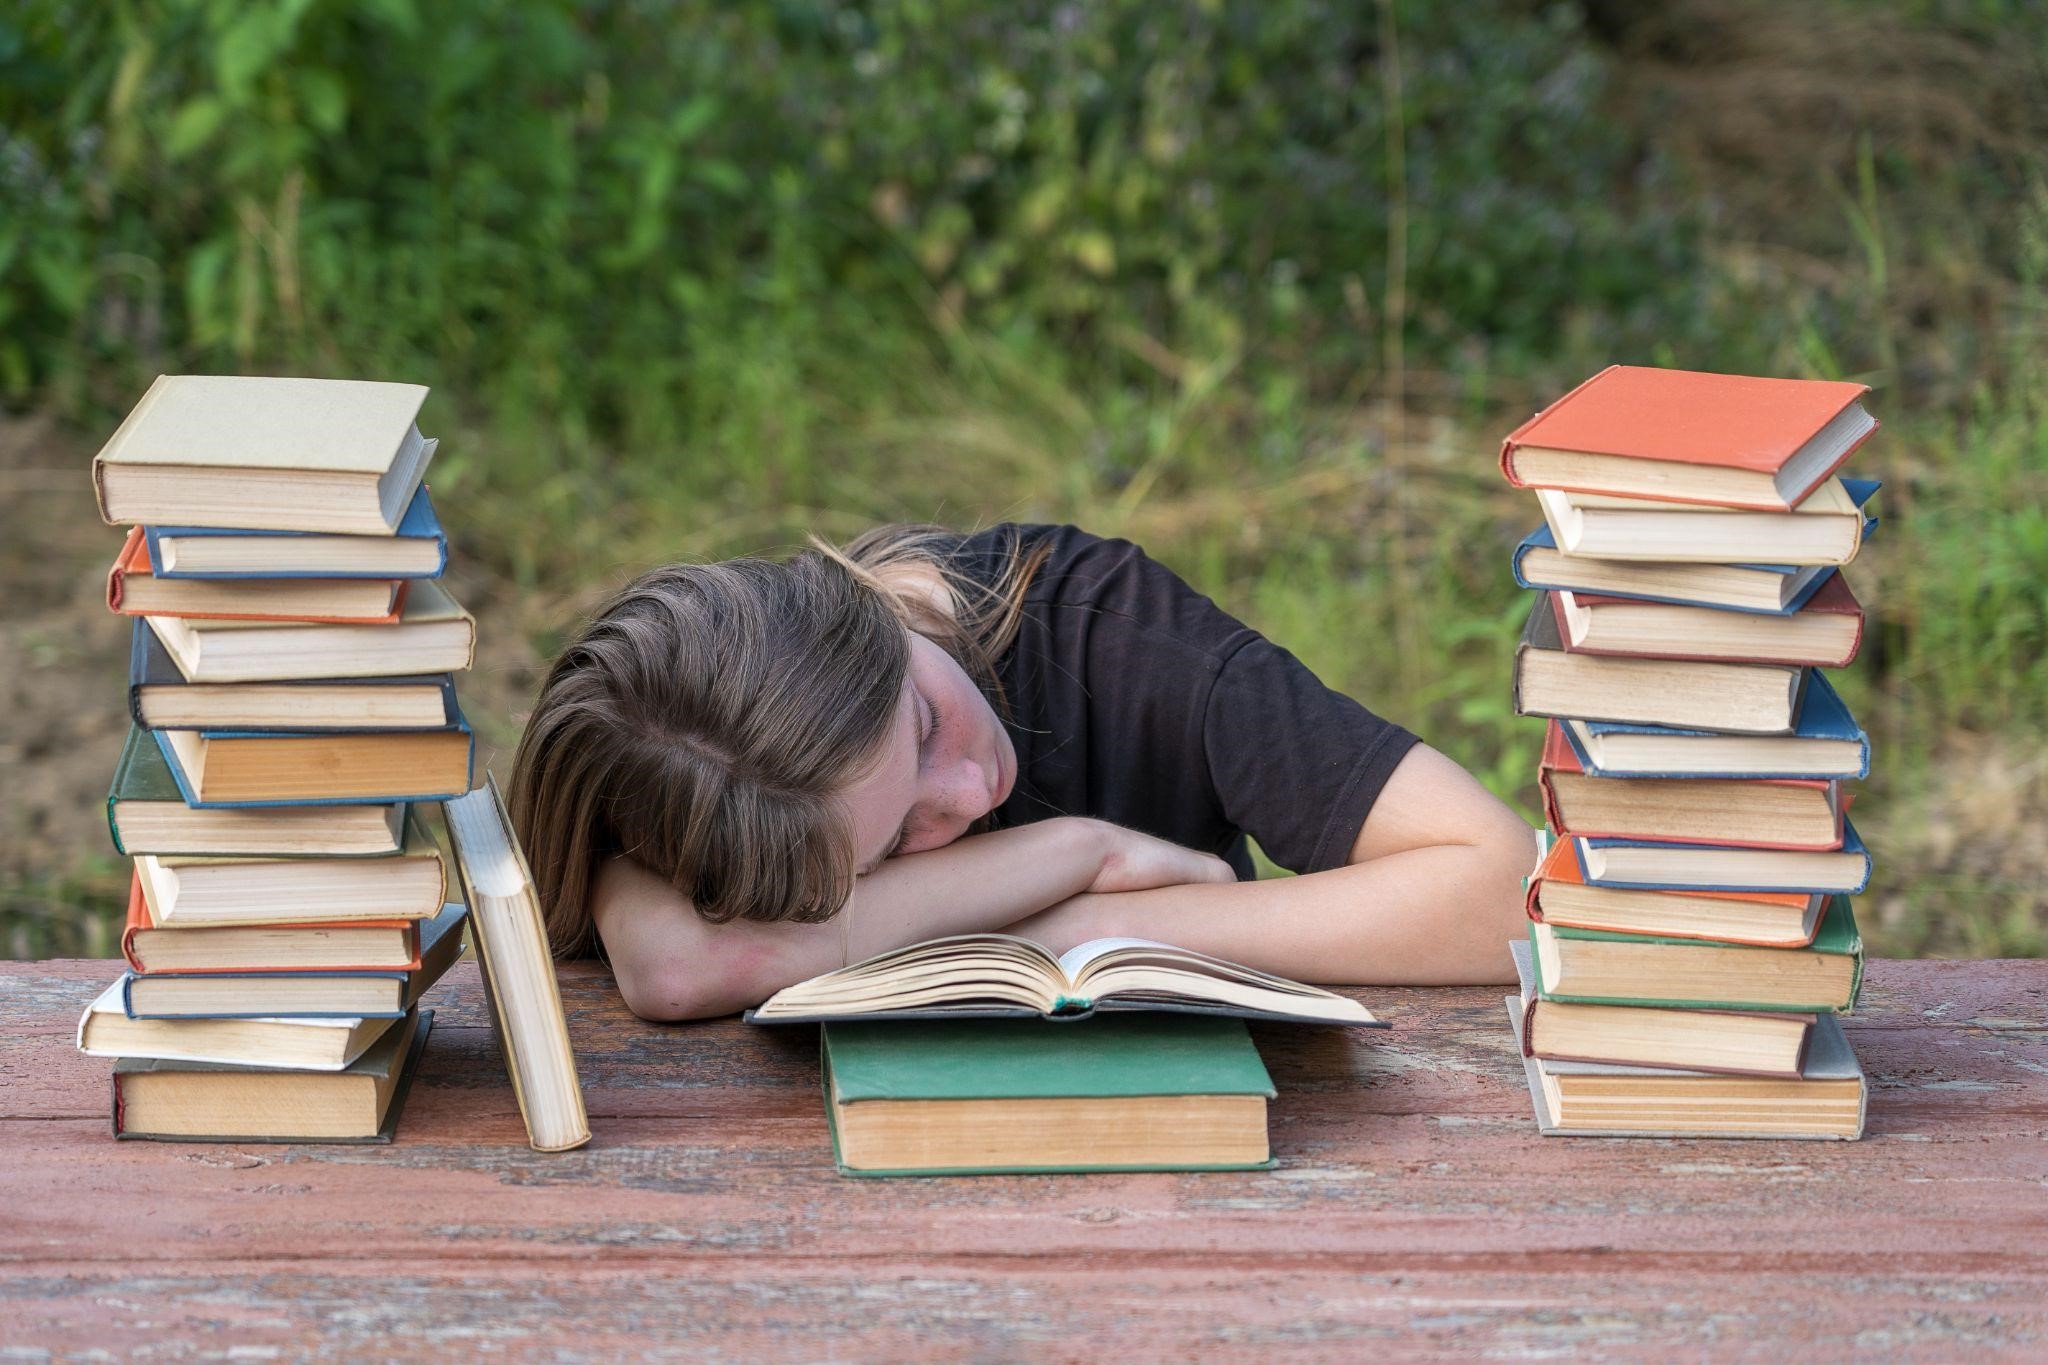 https://www.freepik.com/premium-photo/young-girl-fell-asleep-after-reading-books-wooden-table-garden_14684020.htm#fromView=search&page=2&position=2&uuid=42ee926a-45c1-4420-a0cc-5f7eb37e815c